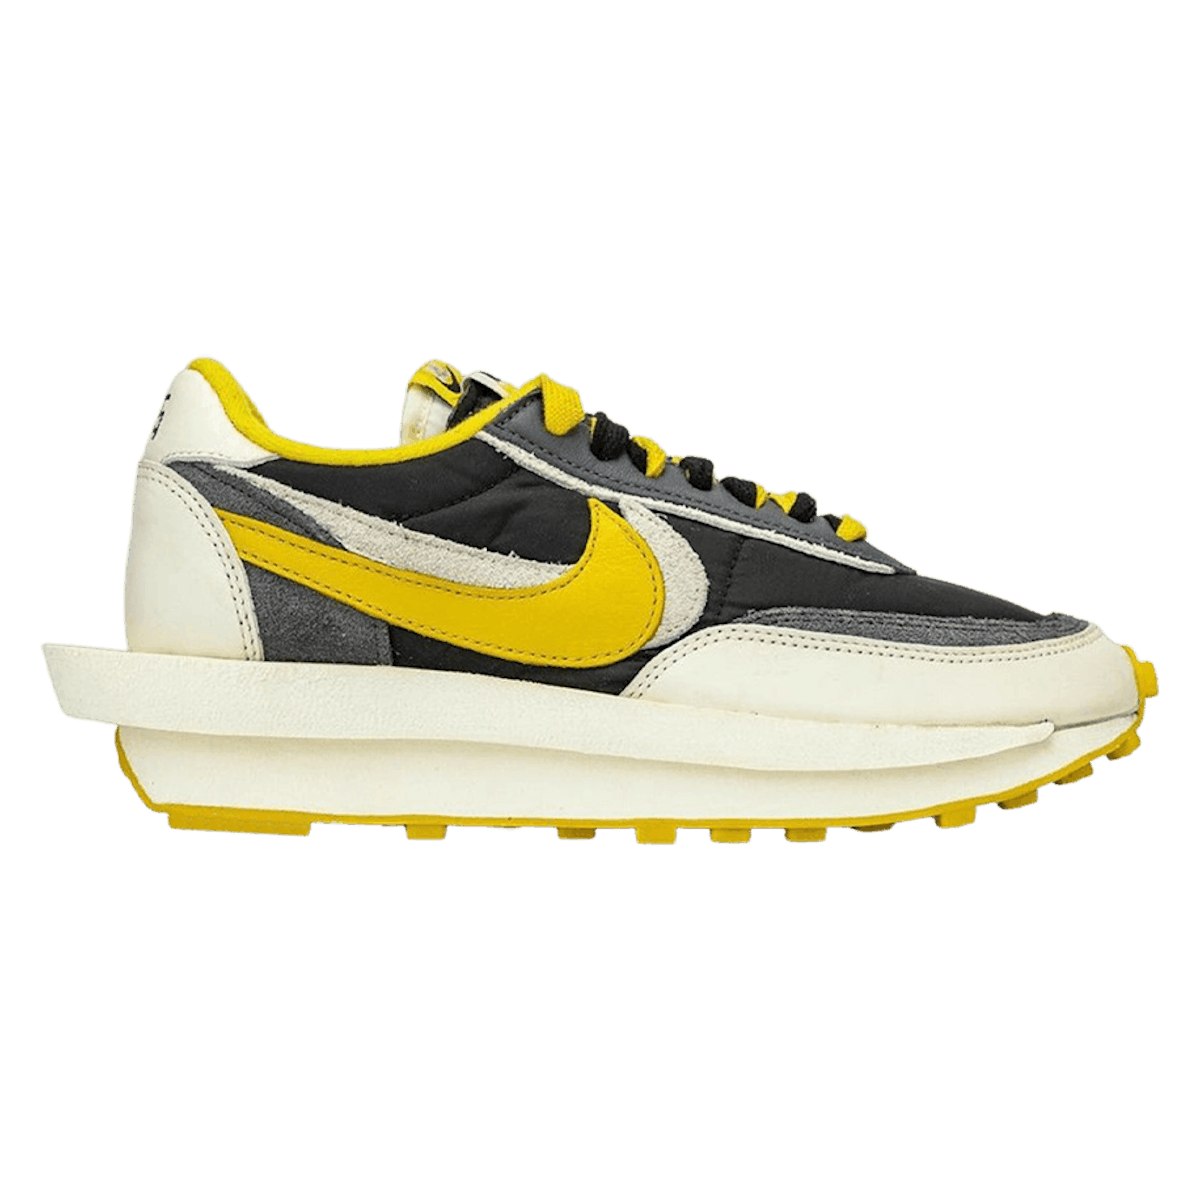 Sacai x Undercover x Nike LDWaffle "Black and Bright Citron"